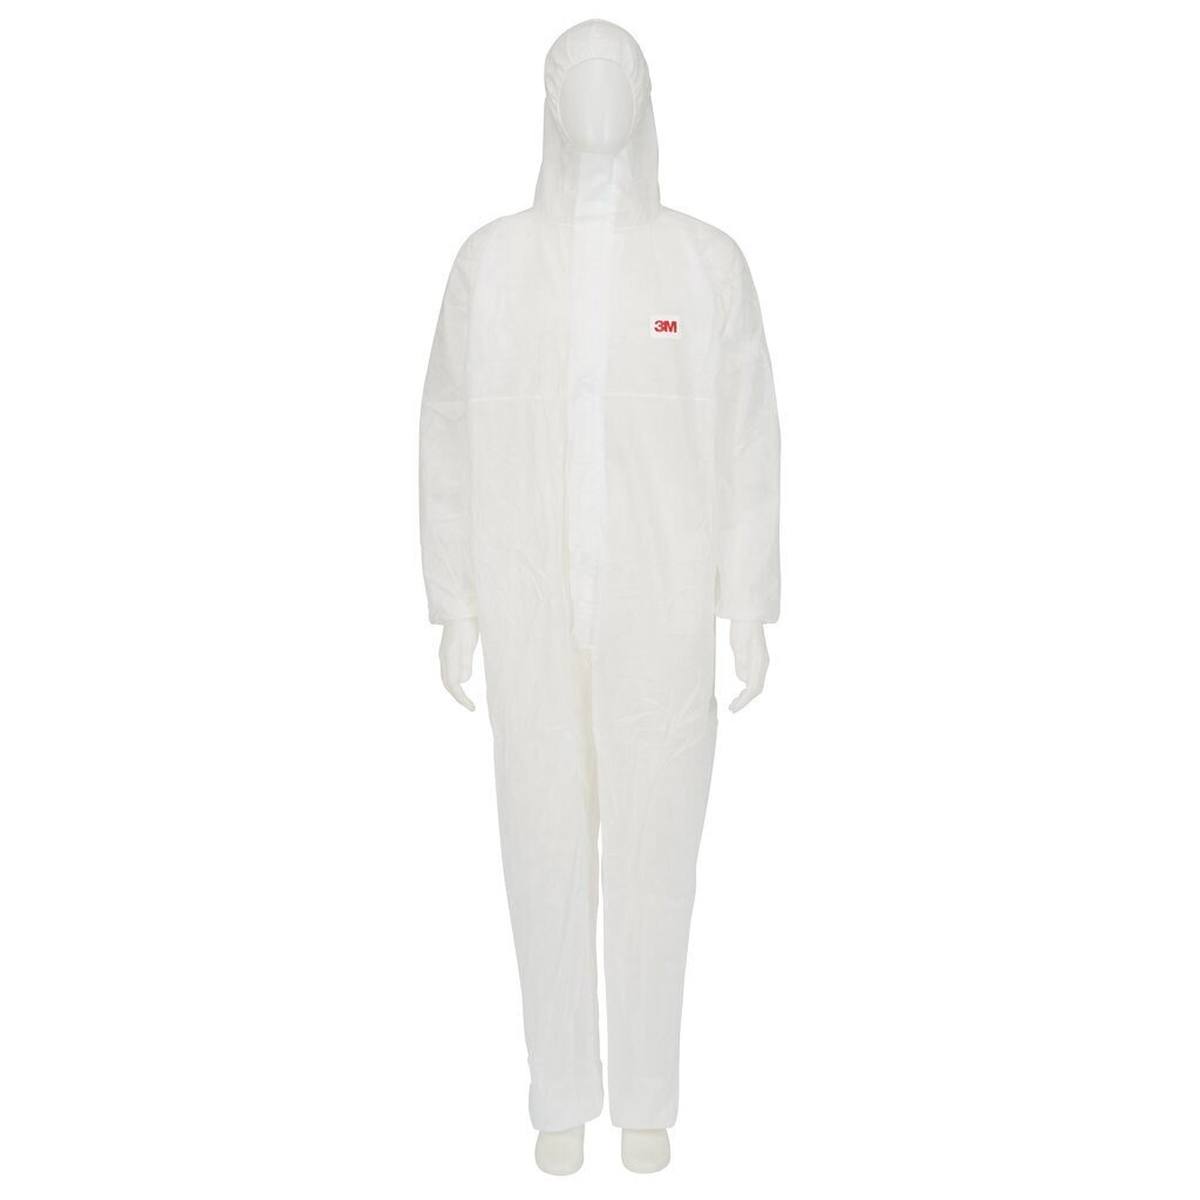 3M 4500 W Protective suit, white, CE, size M, material polypropylene, elasticated cuffs